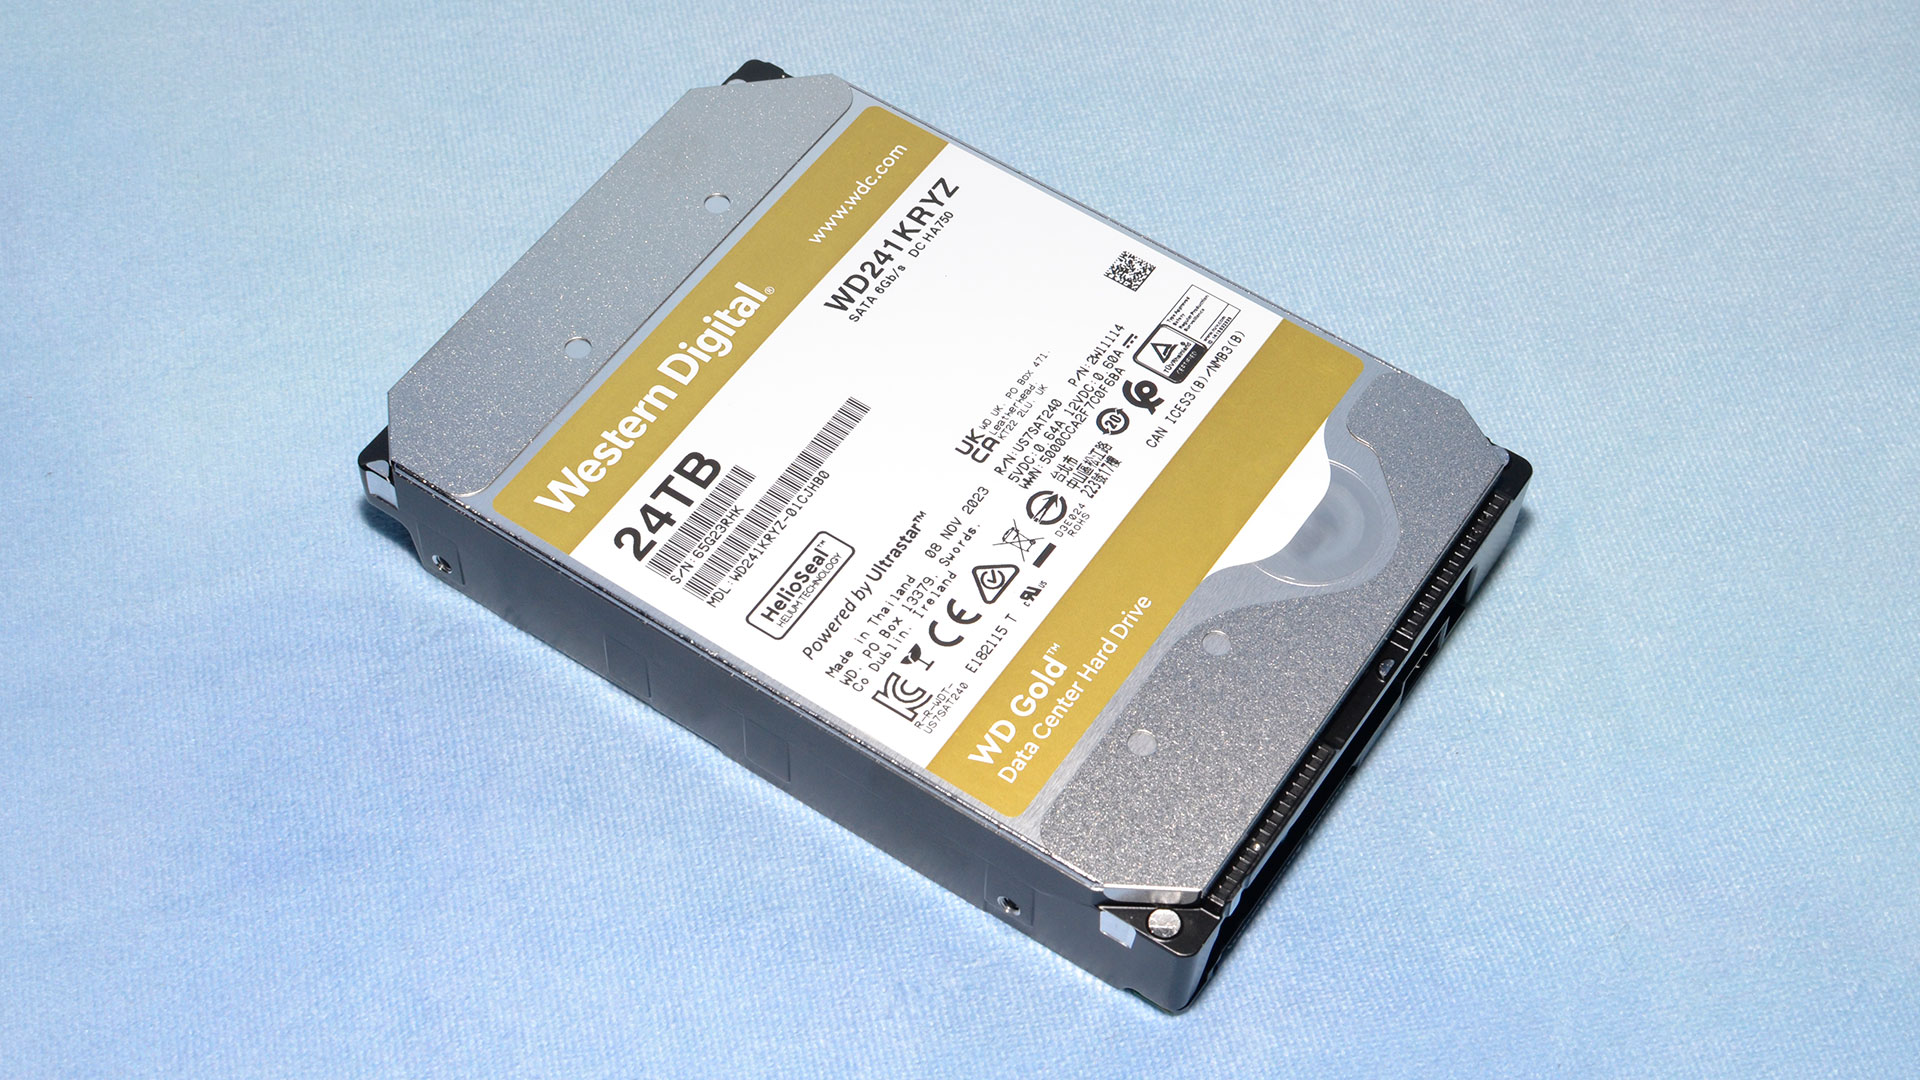 WD Gold 24TB HDD review: The highest capacity hard drive you can buy right now